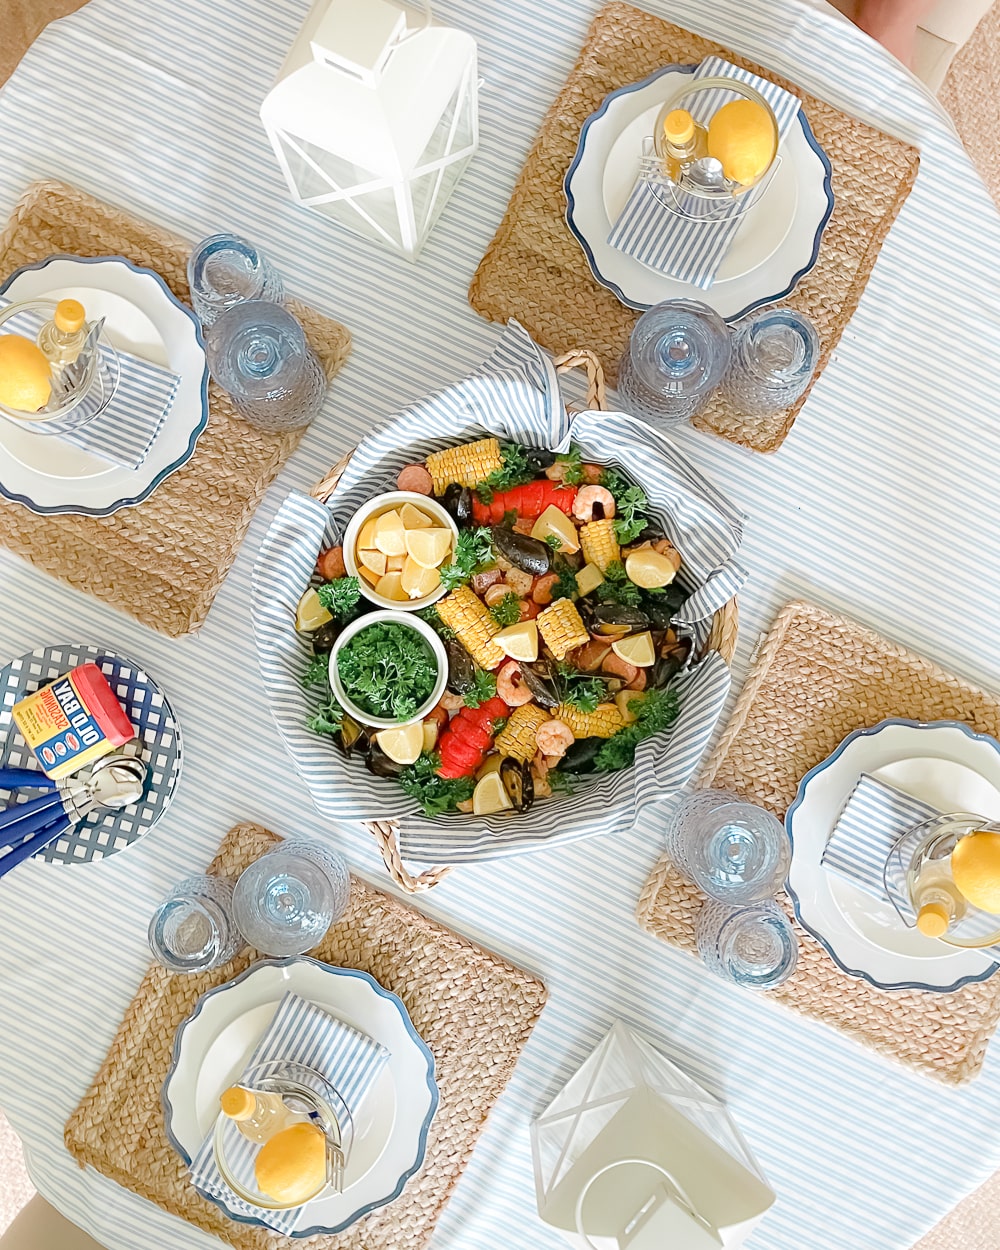 Blogger Stephanie Ziajka designed this simple summer tablescape using natural jute placemats, blue Villeroy and Boch goblets, and white and blue scalloped dinner plates on Diary of a Debutante